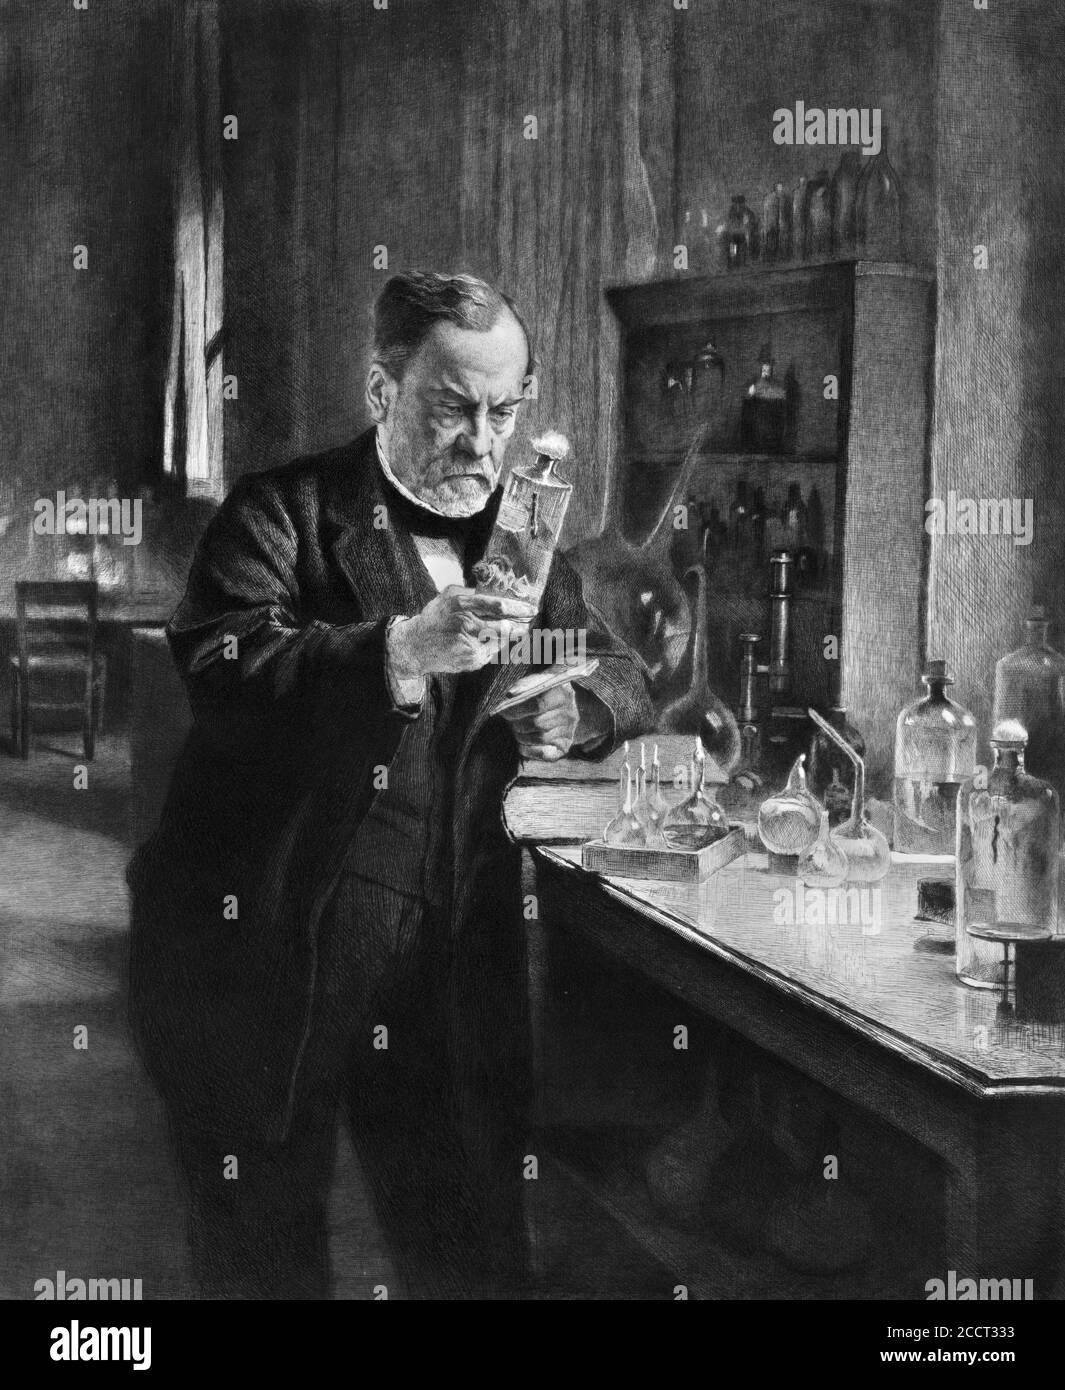 Portrait of Louis Pasteur (1822-1895). Pasteur was a French biologist, microbiologist, and chemist renowned for his discoveries of the principles of vaccination, microbial fermentation and pasteurisation. Etching by Flameny from an artwork by Edelfeldt, 1892 Stock Photo